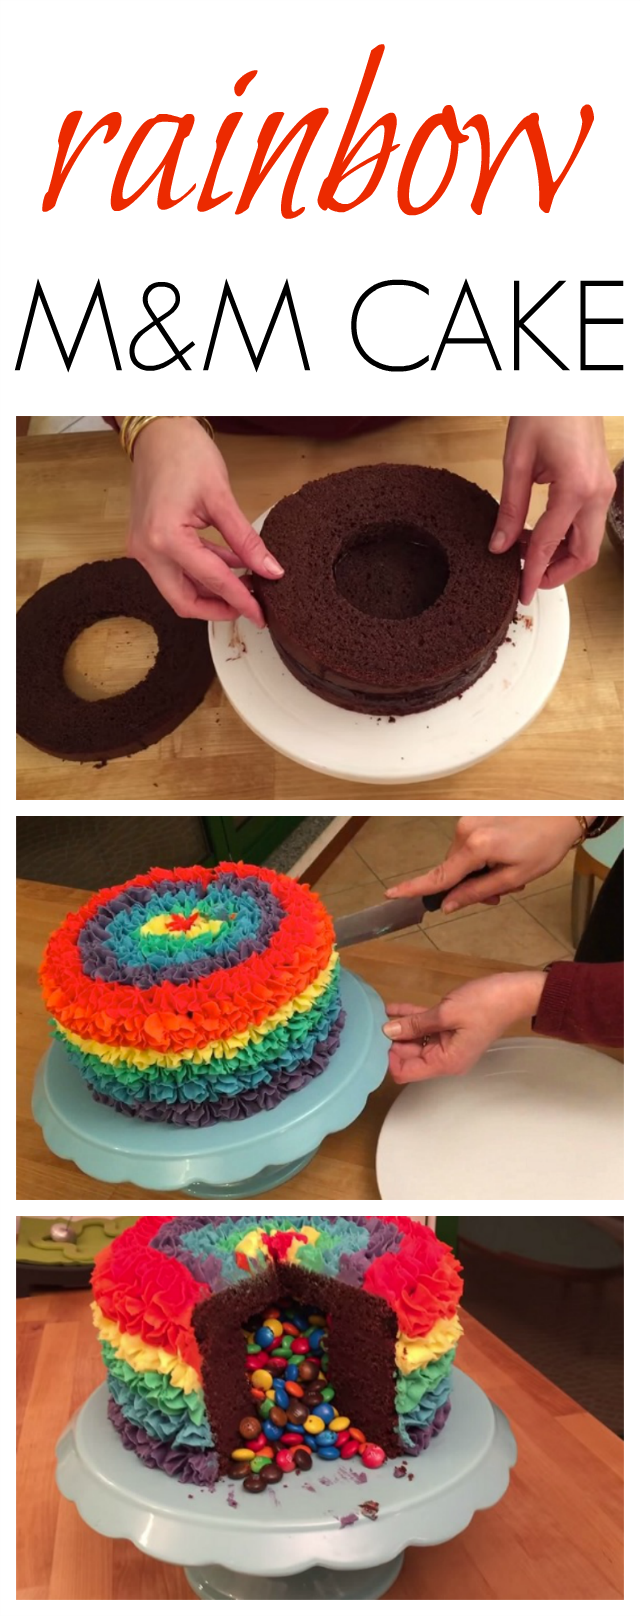 It may look like an ordinary cake, but wait till you cut it in half